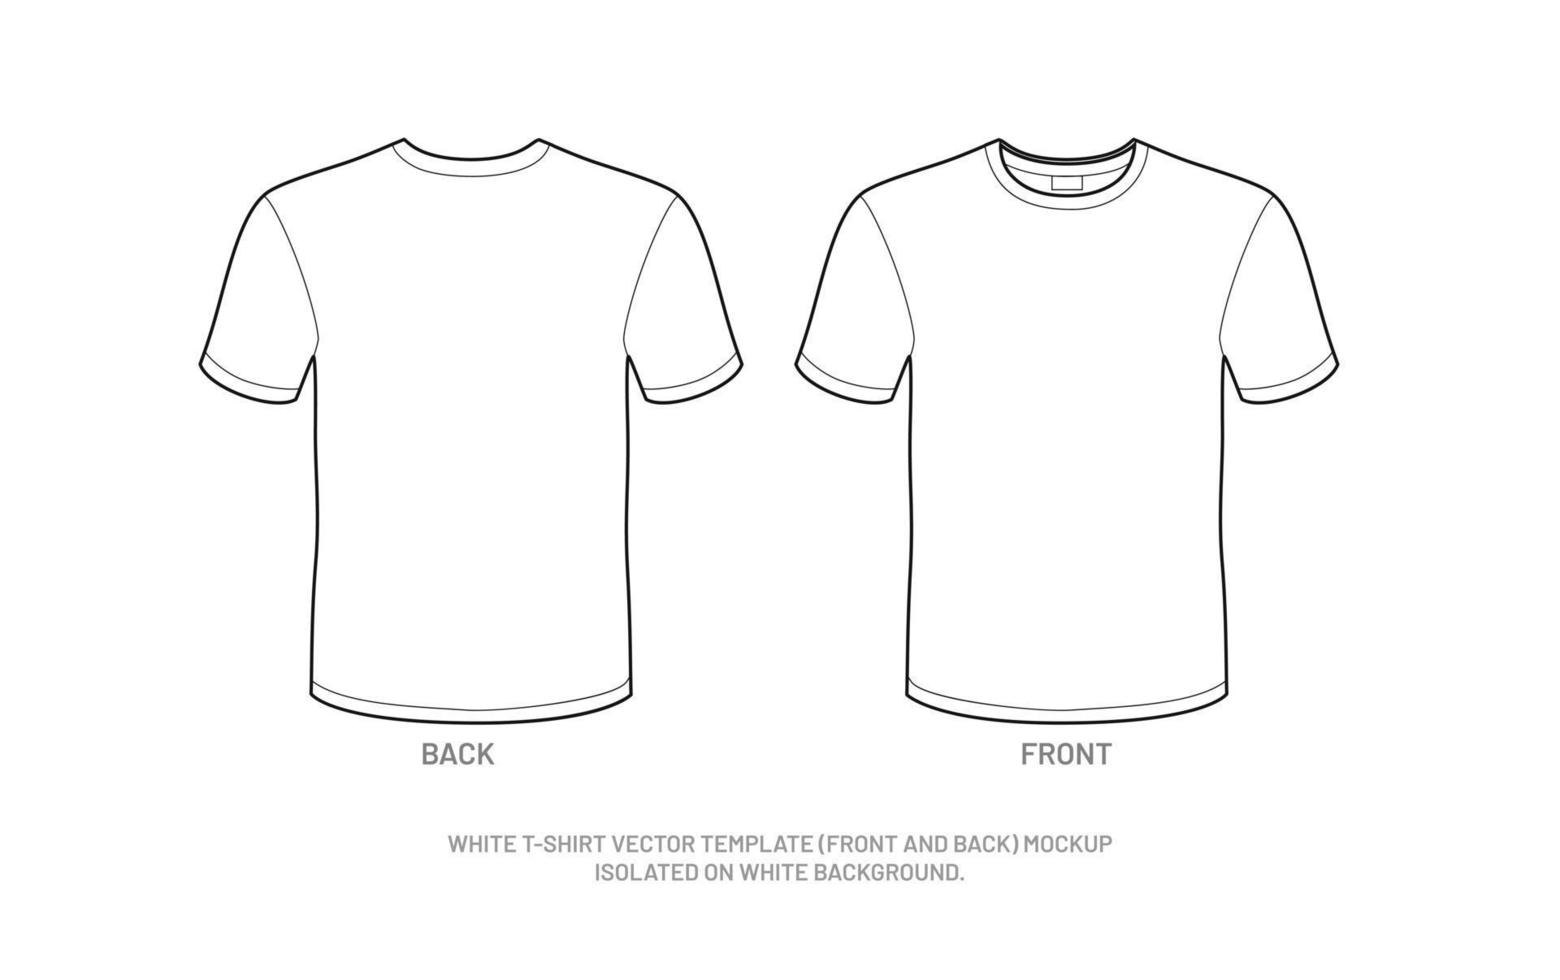 White T shirt vector template front and back mockup isolated on white background